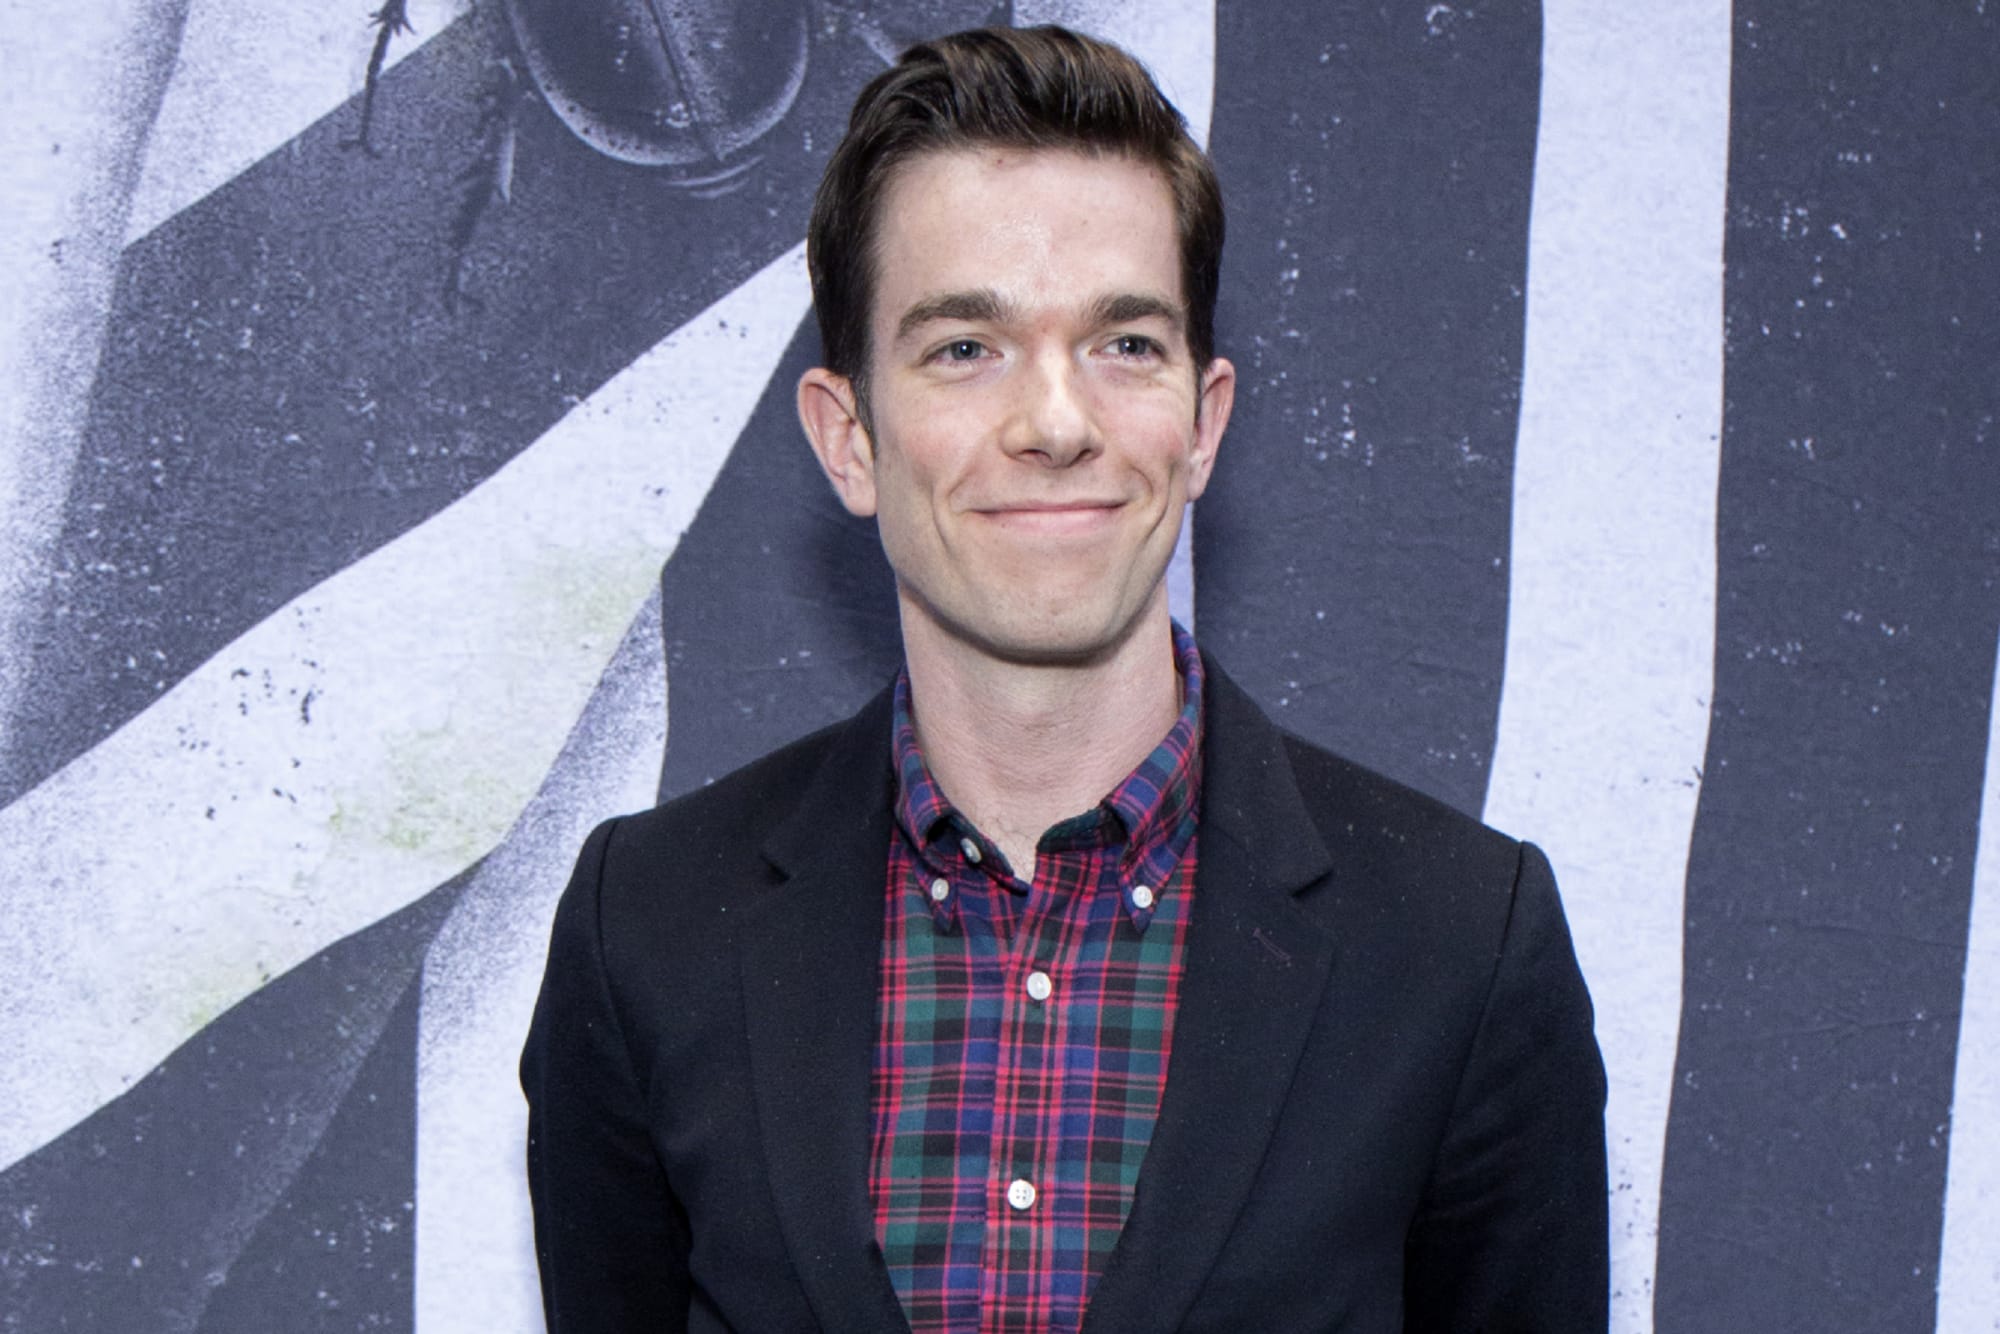 Saturday Night Live: Highlights from John Mulaney's fourth appearance